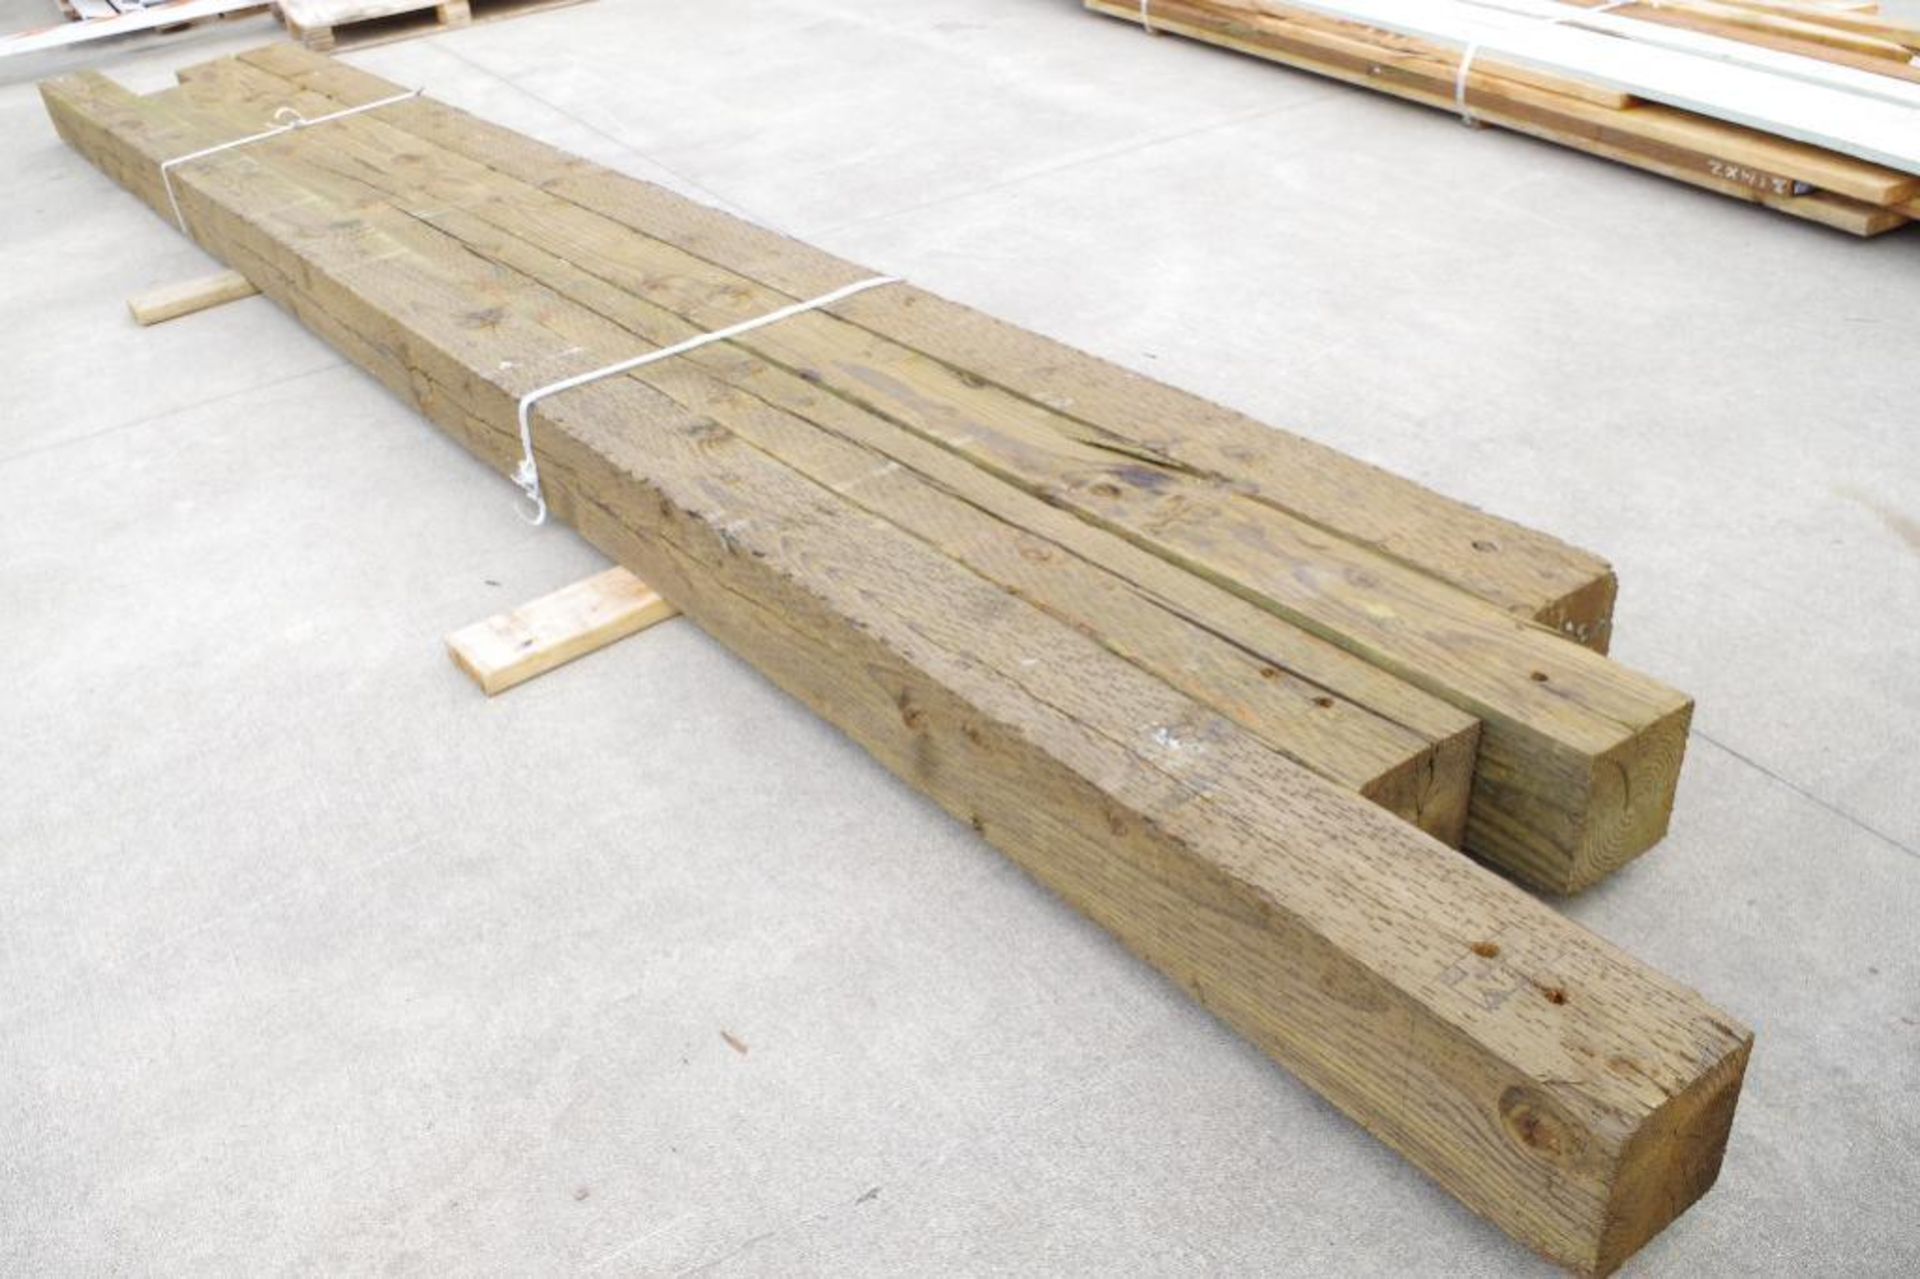 [4] 8x8 Pressure Treated Beams, Lengths from 16' to 20'